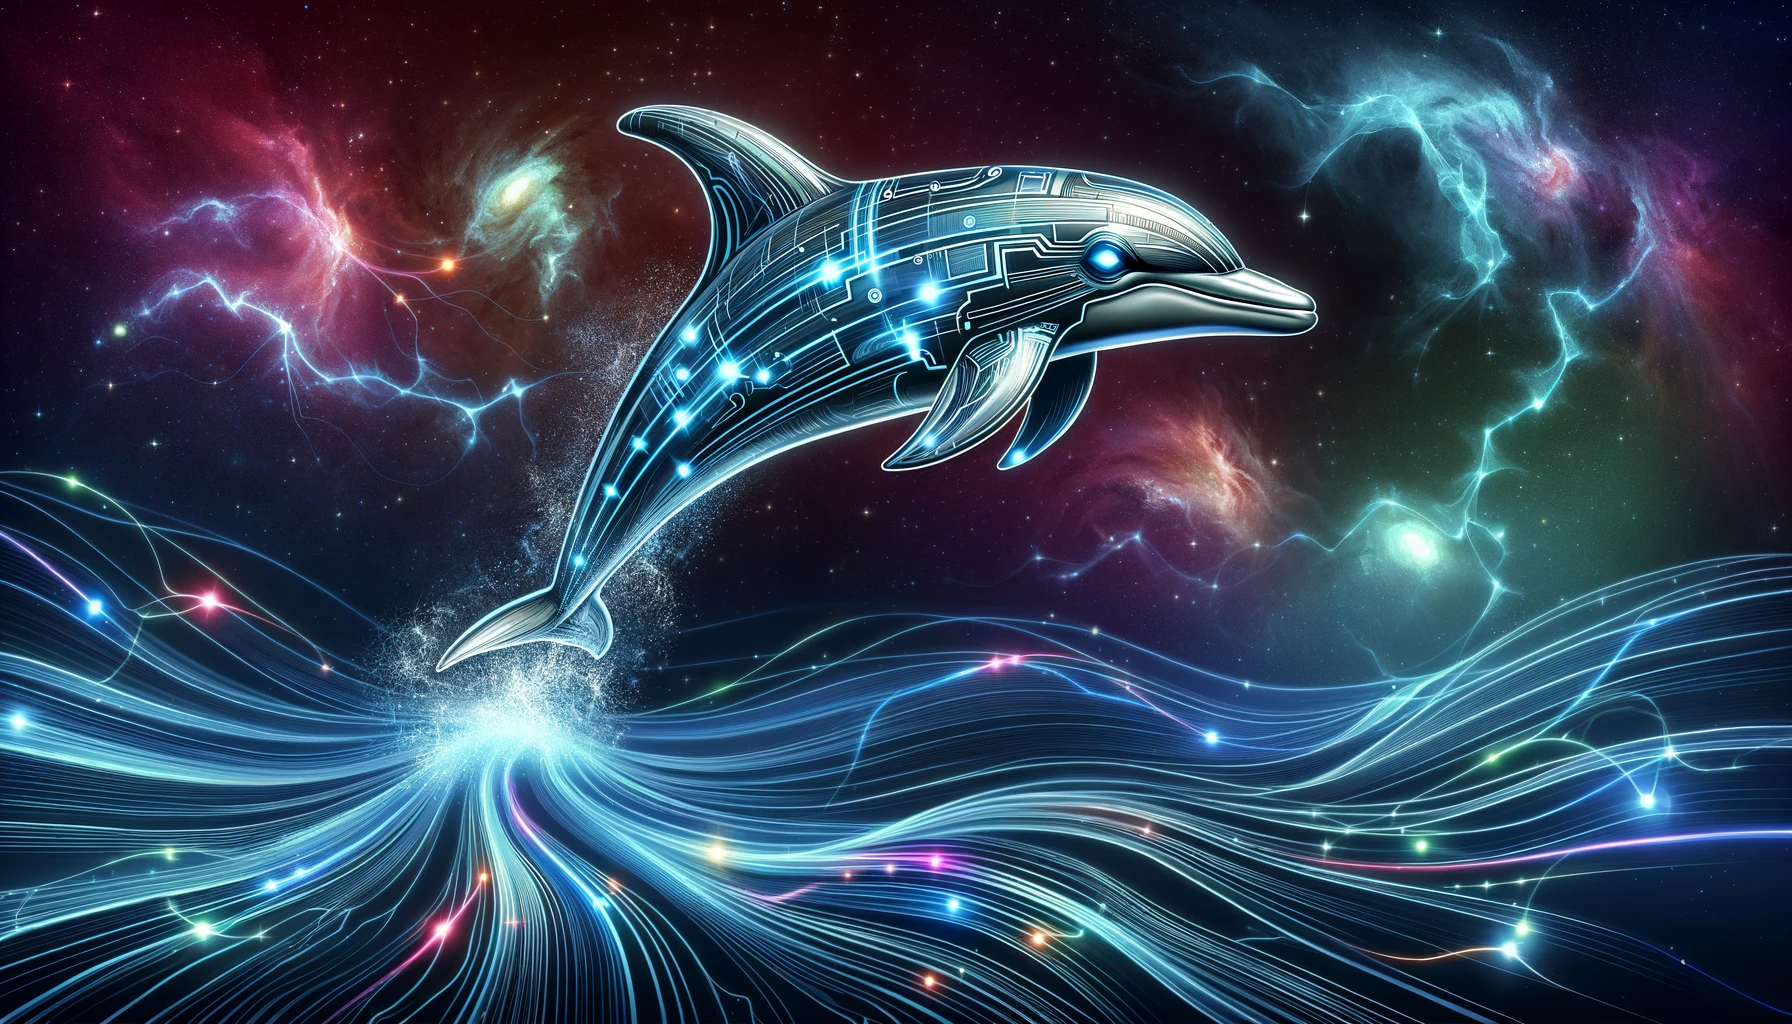 laser_dolphin_image